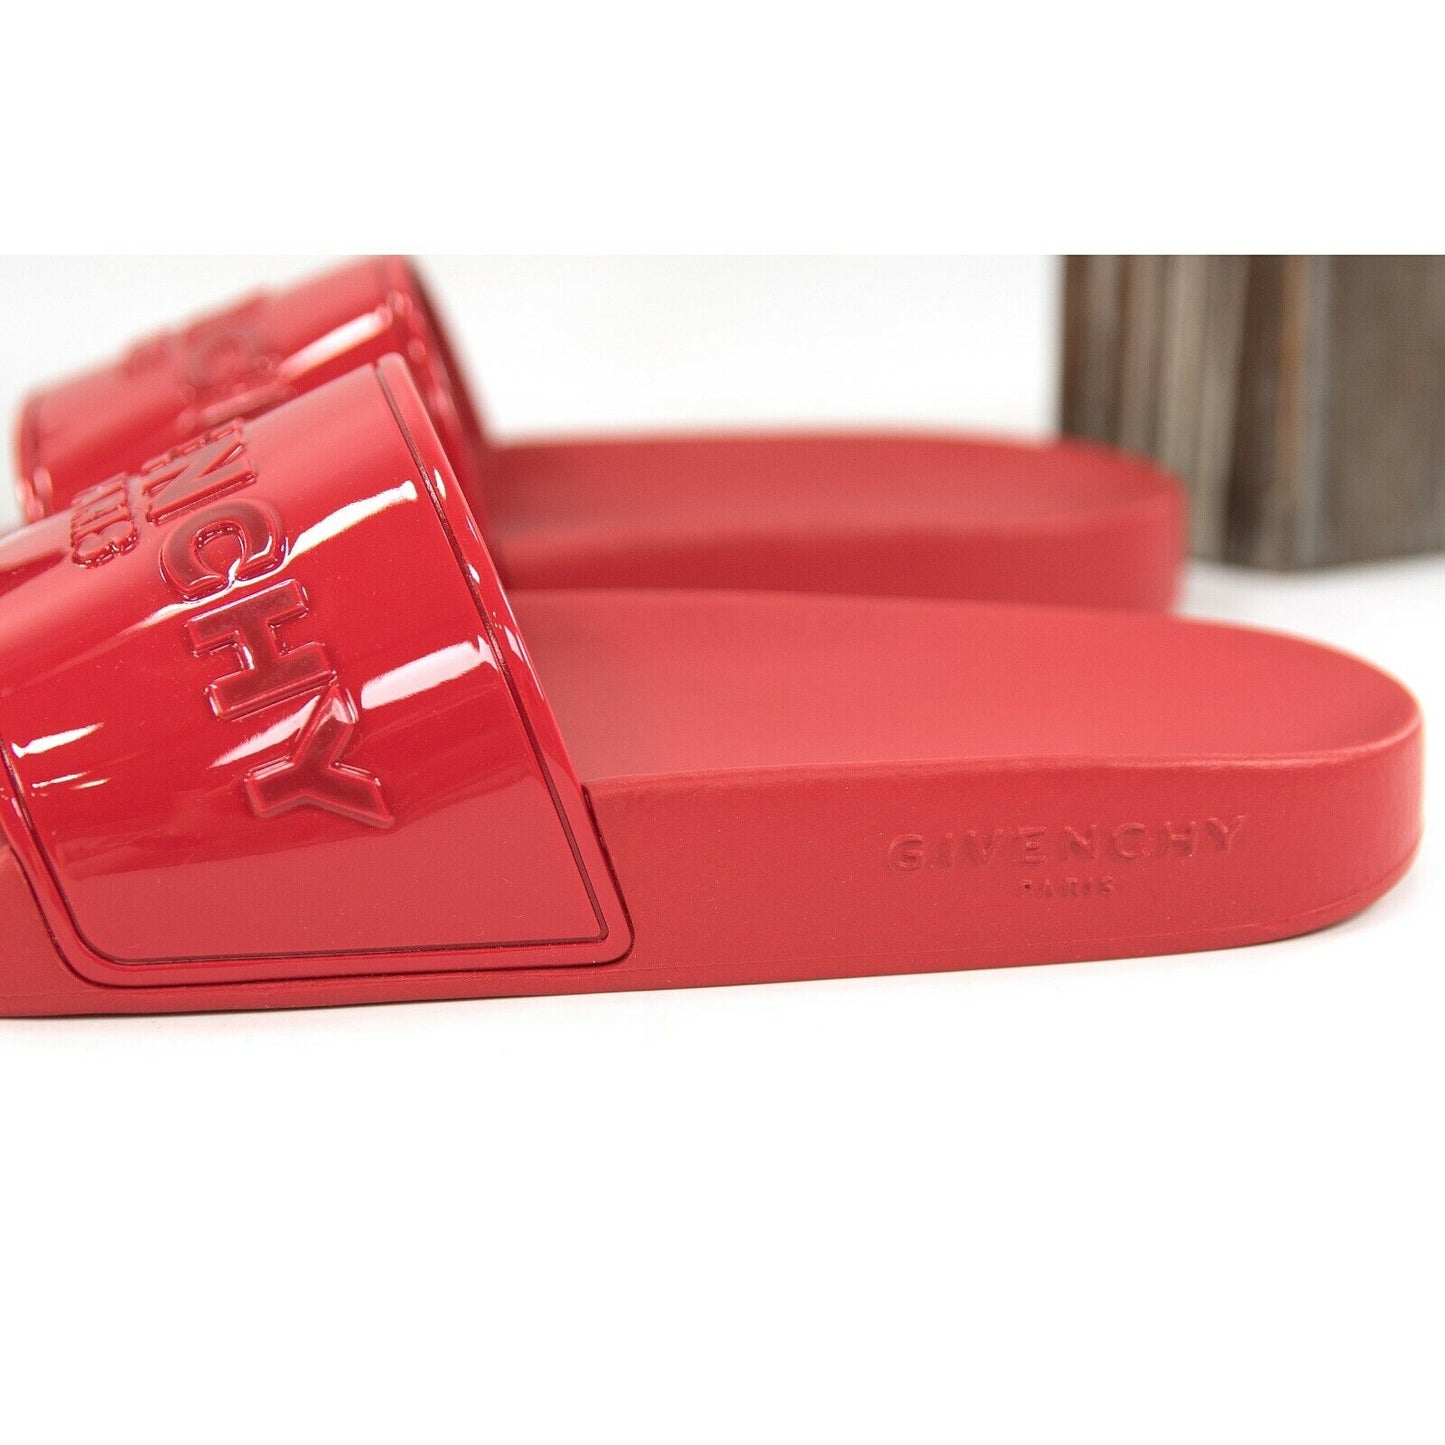 Givenchy Red Patent Debossed Logo Leather Rubber Pool Slides 38 NIB